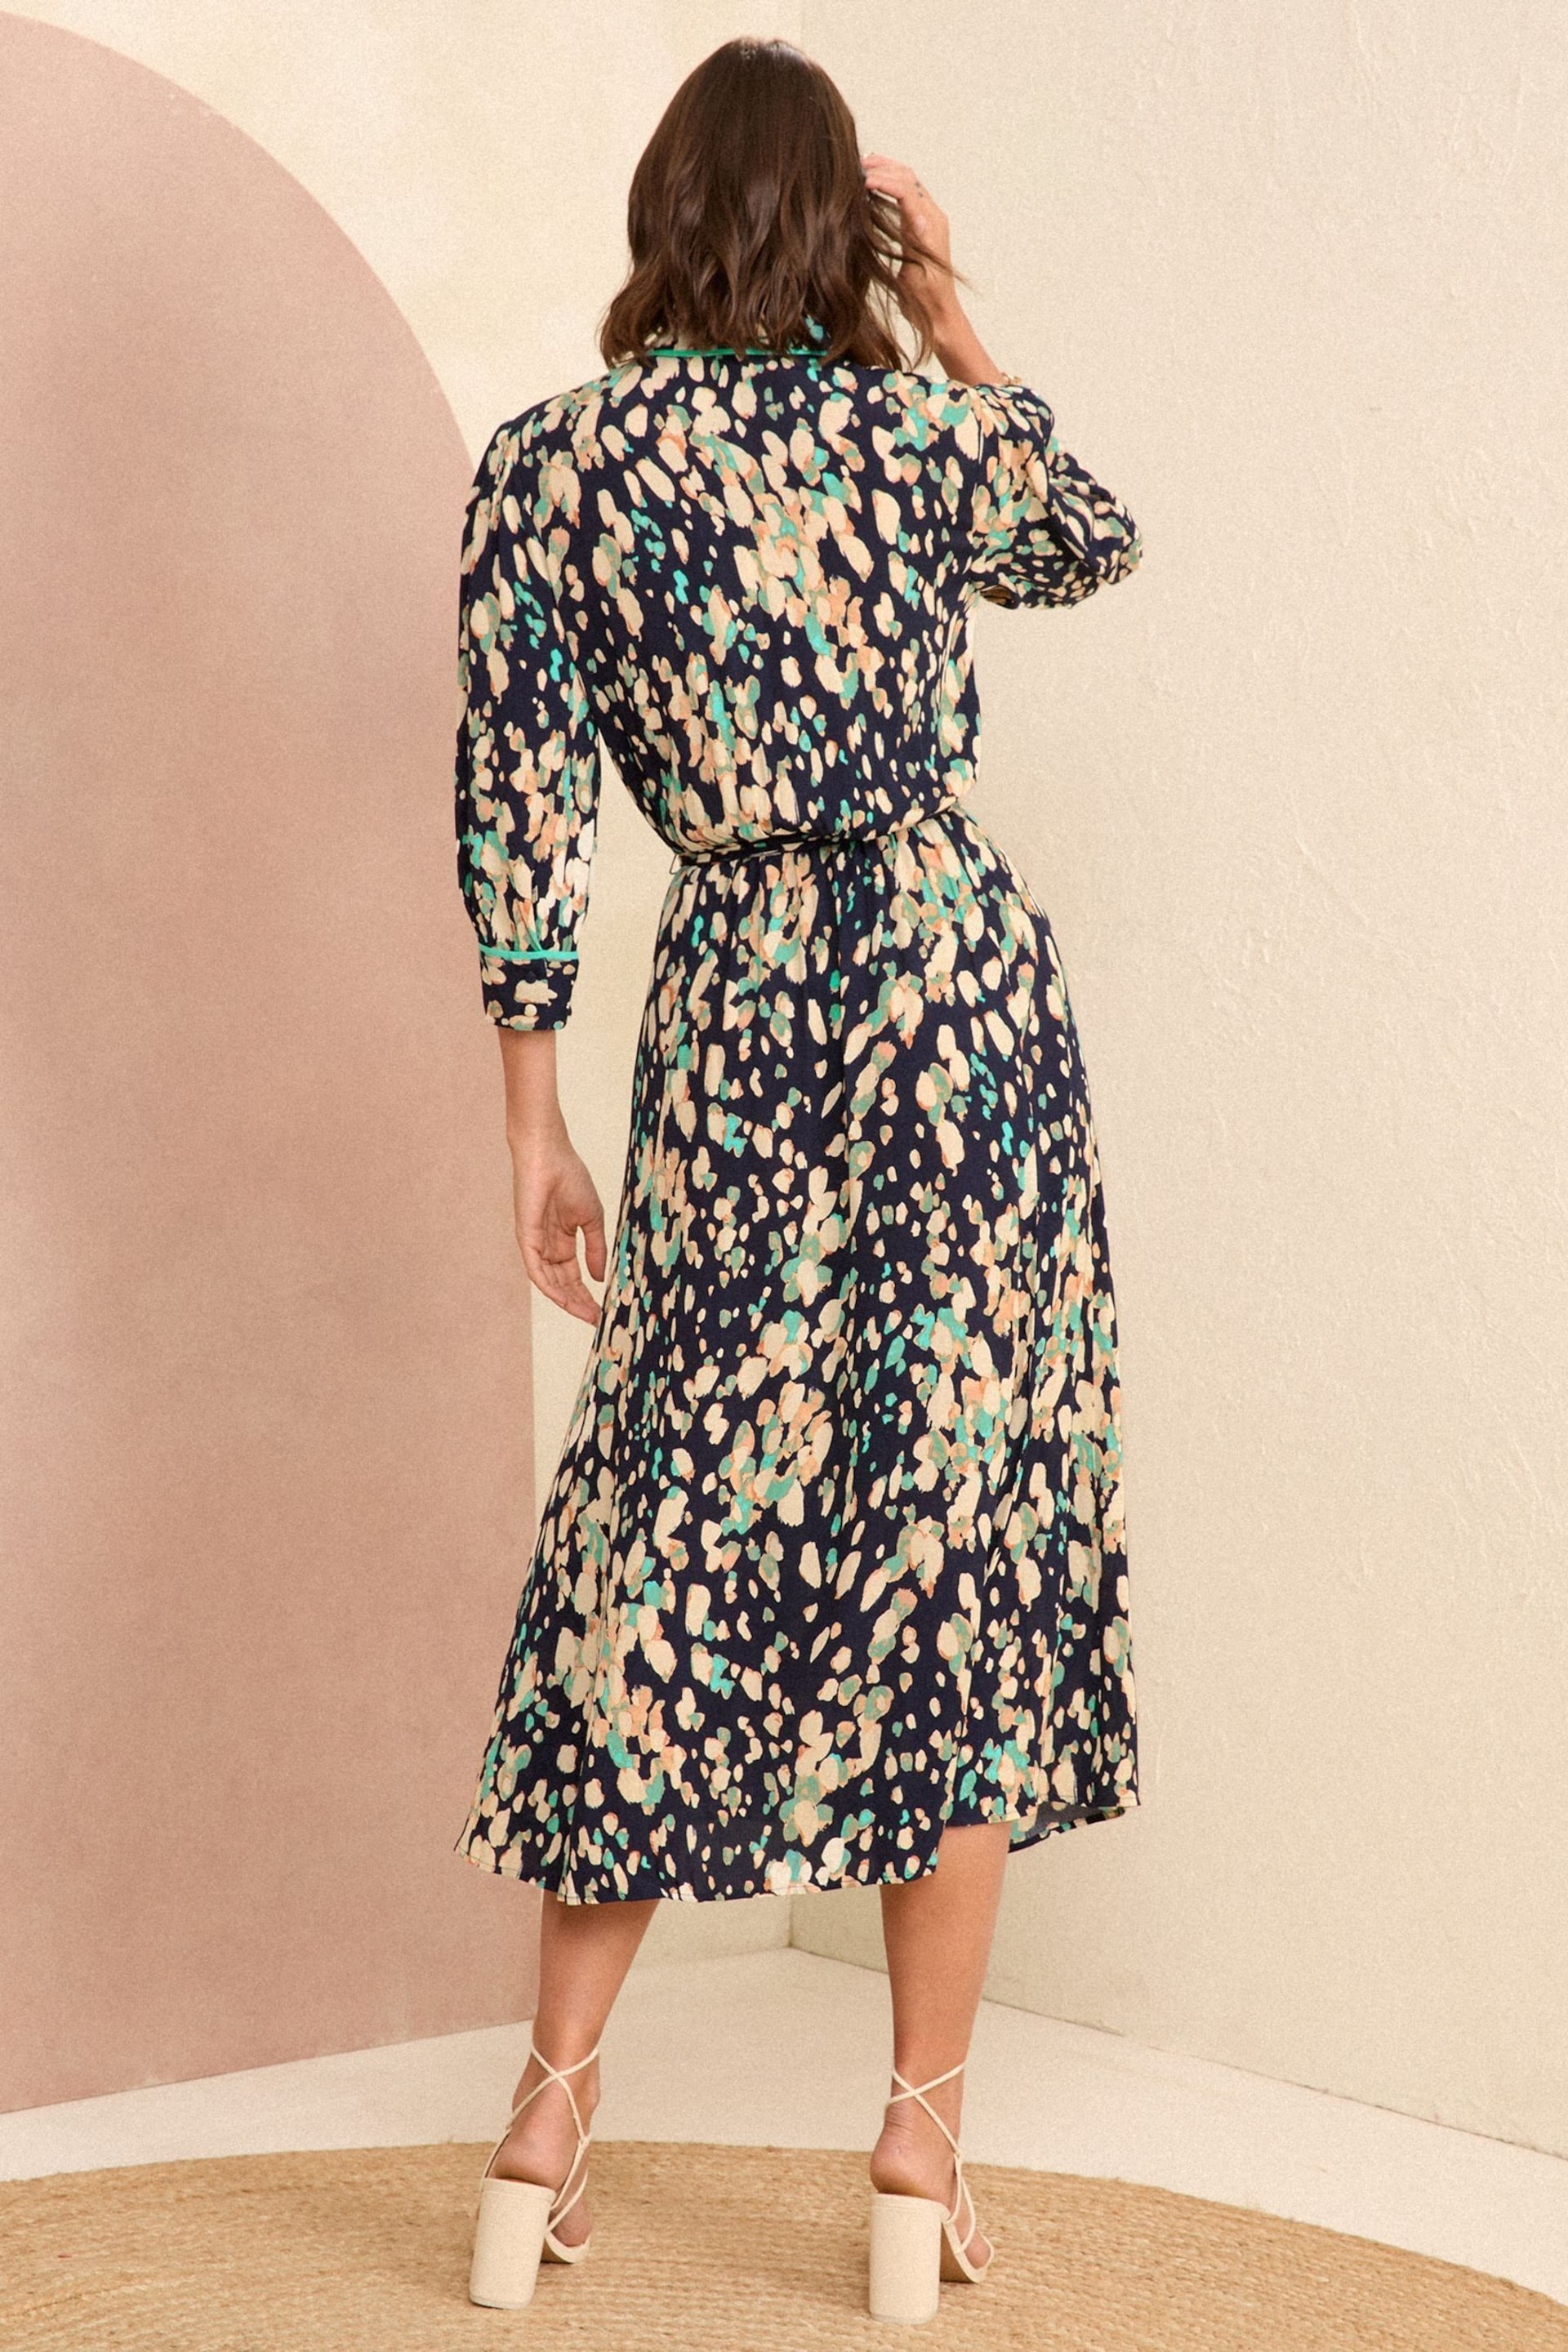 Love & Roses Navy Blue Printed Patch Pockets Shirt Dress - Image 3 of 4